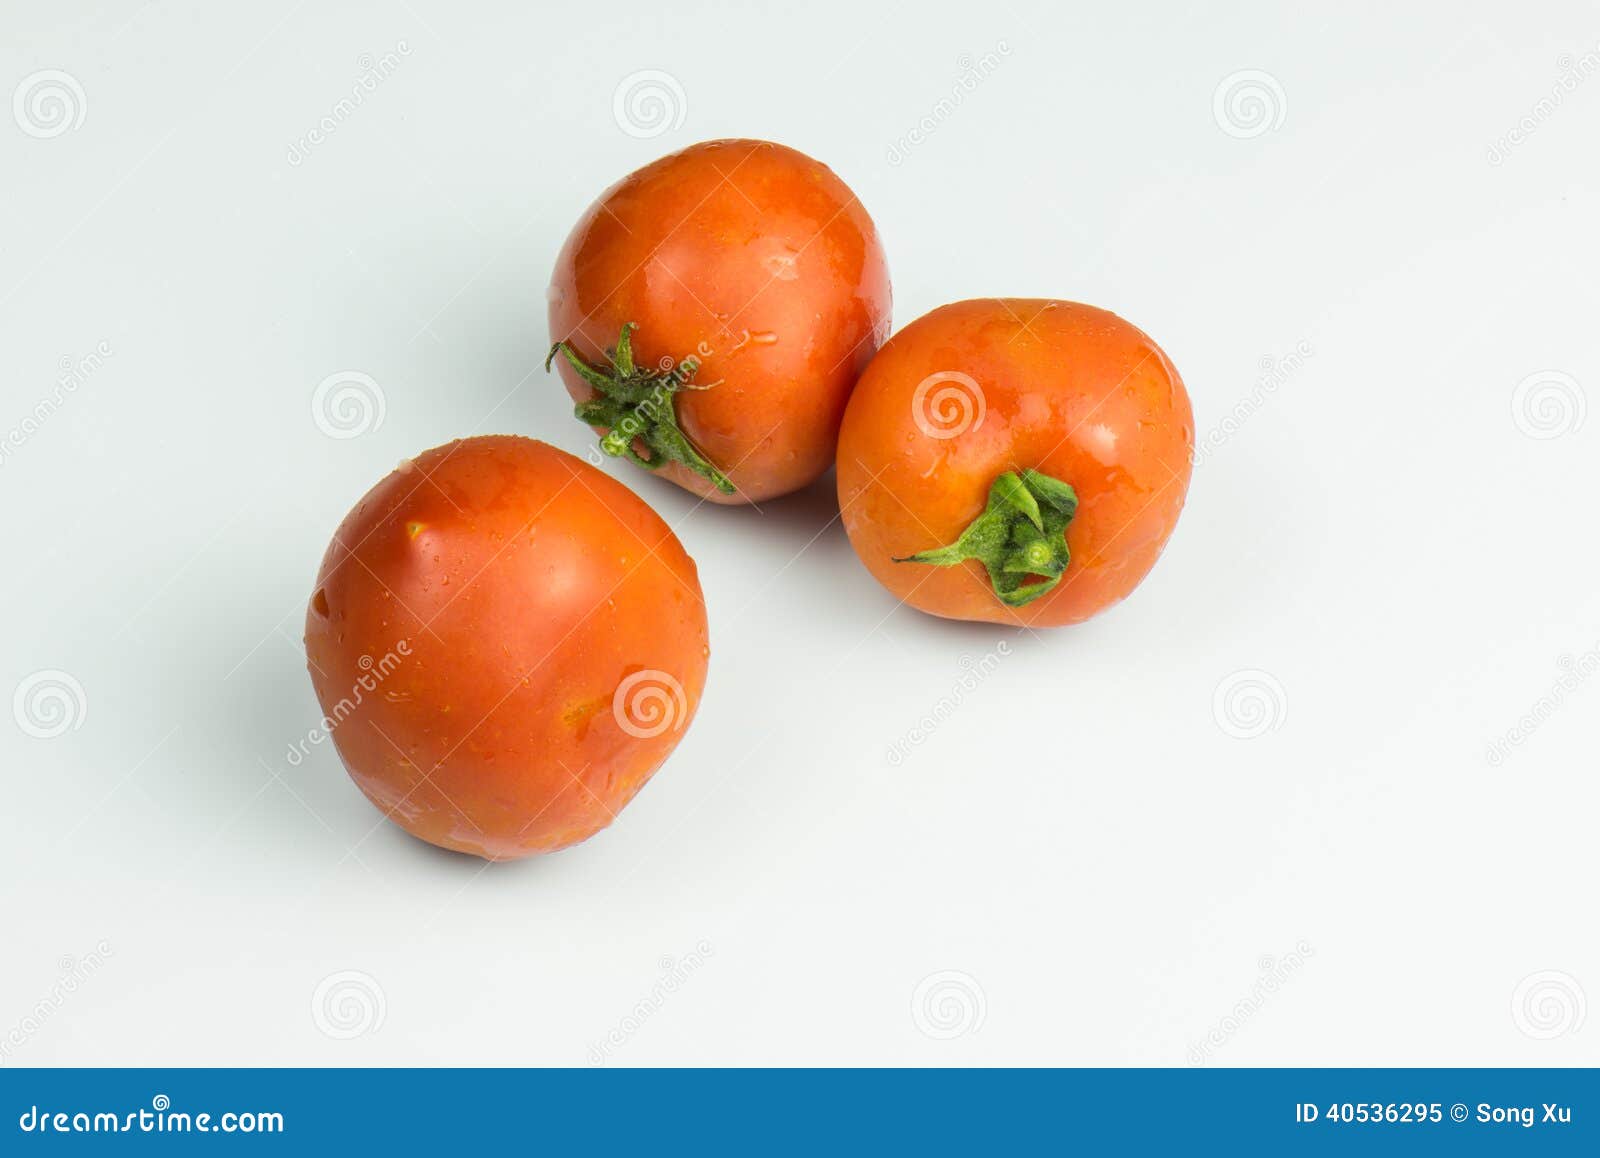 Fresh cut tomatoes stock image. Image of nutrition, tomatoesnn - 40536295